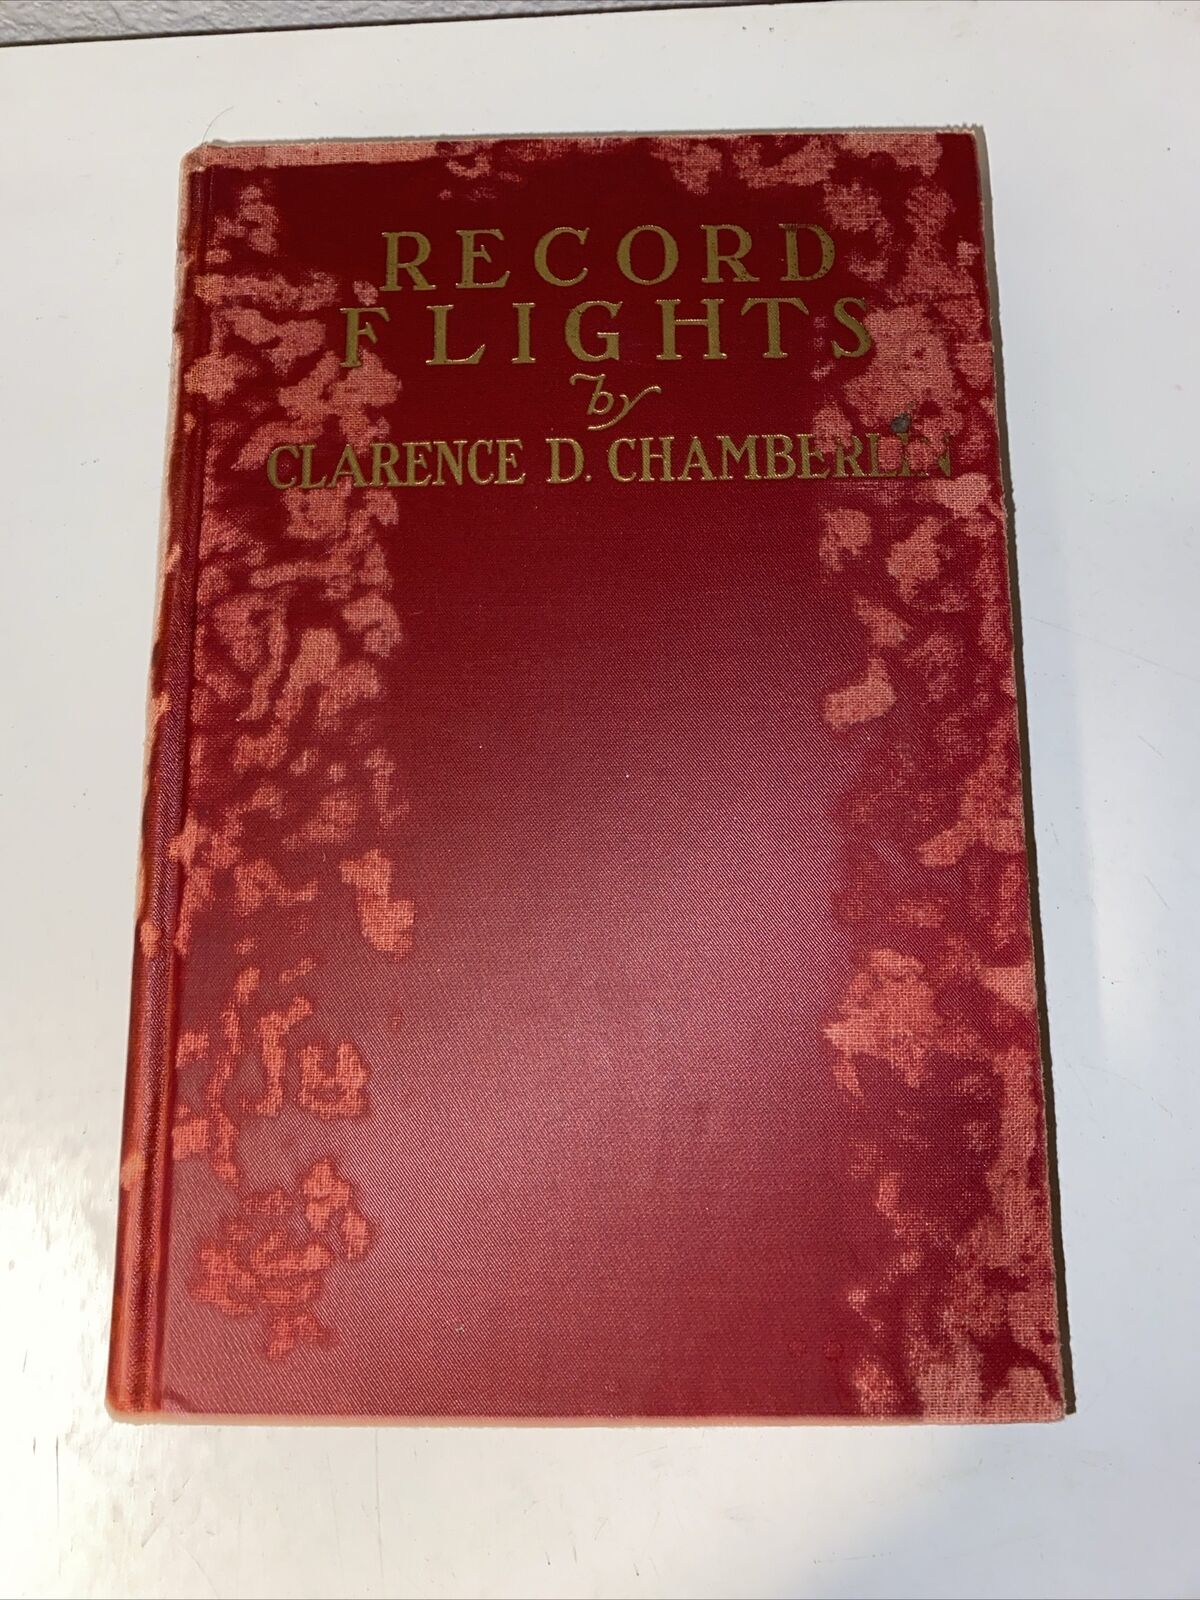 Clarence Chamberlin Record Flight Autographed Limited Edition of 500 Book 1928